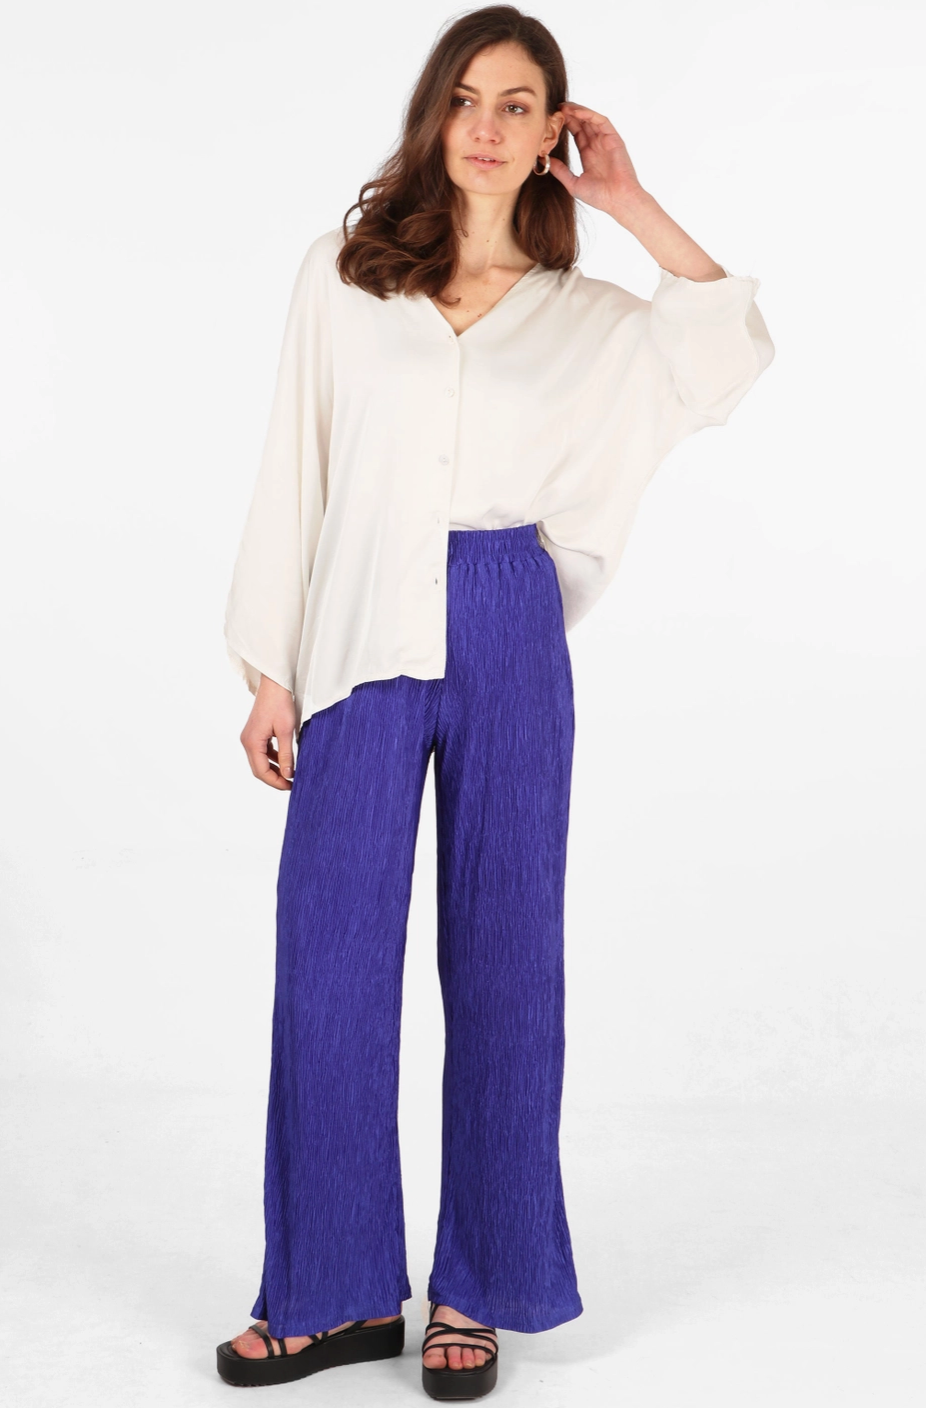 Ebba Plisse Pleat Trousers in Royal Blue